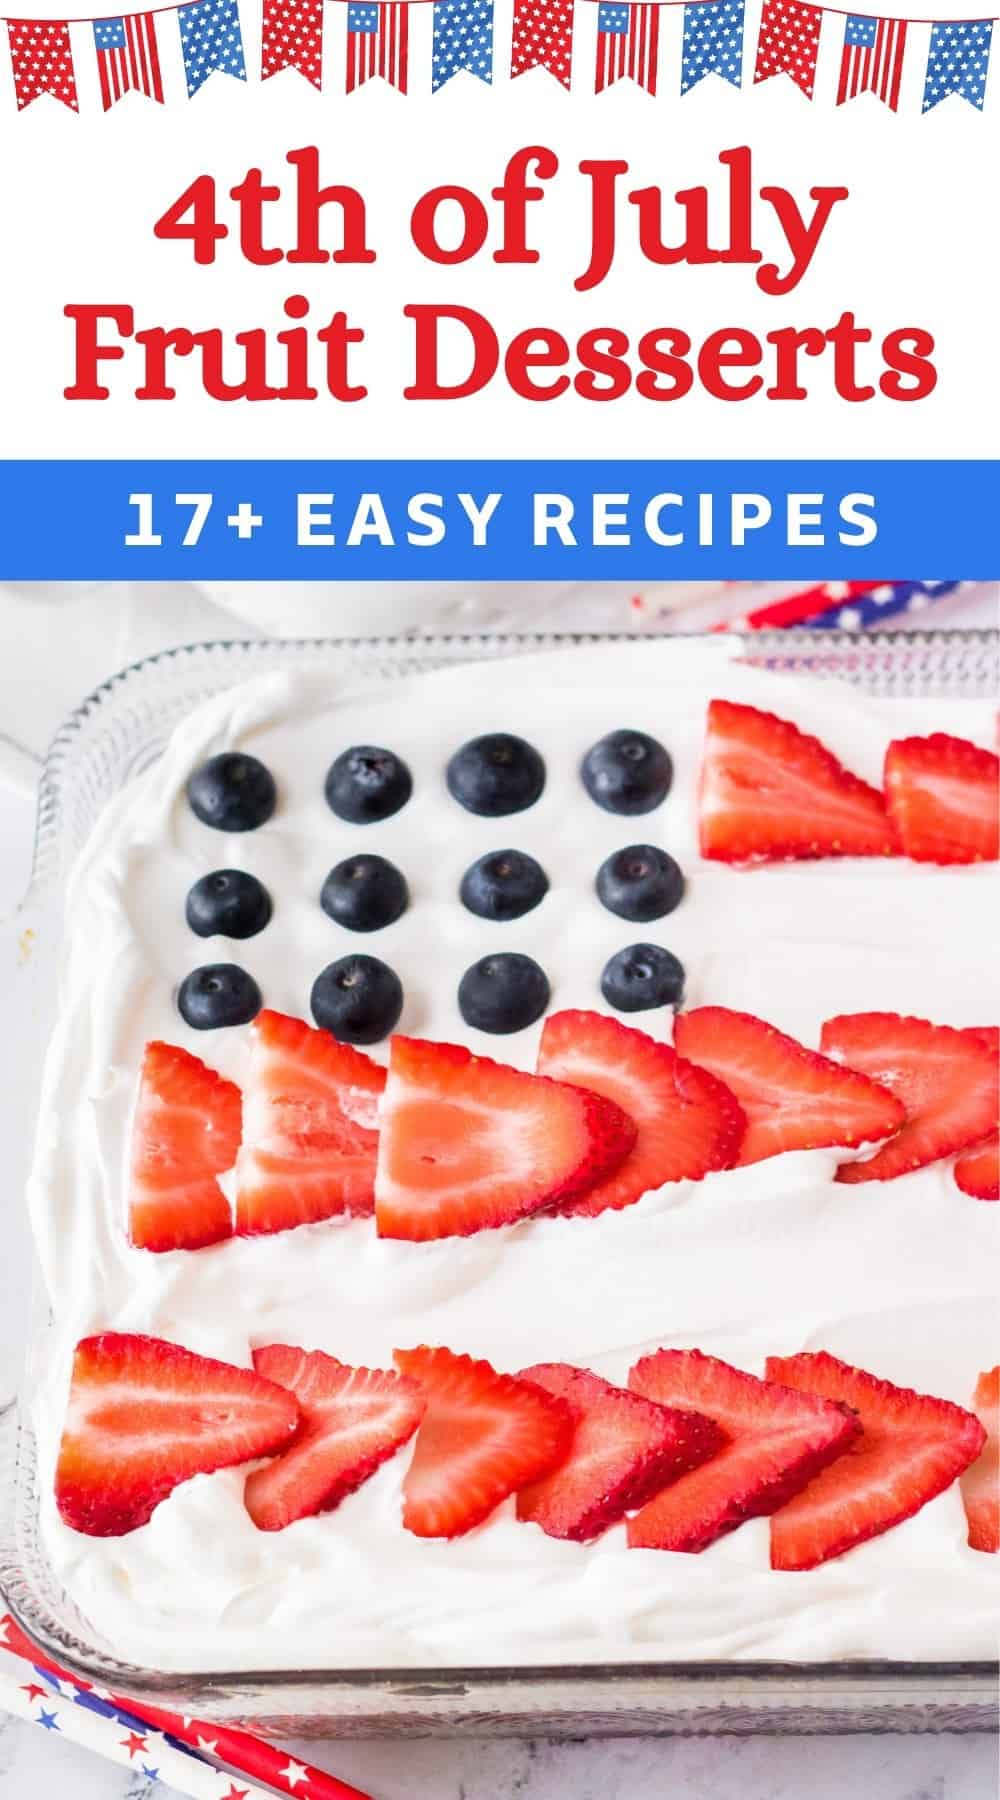 4th of July Fruit Desserts - 17+ Easy Recipes.